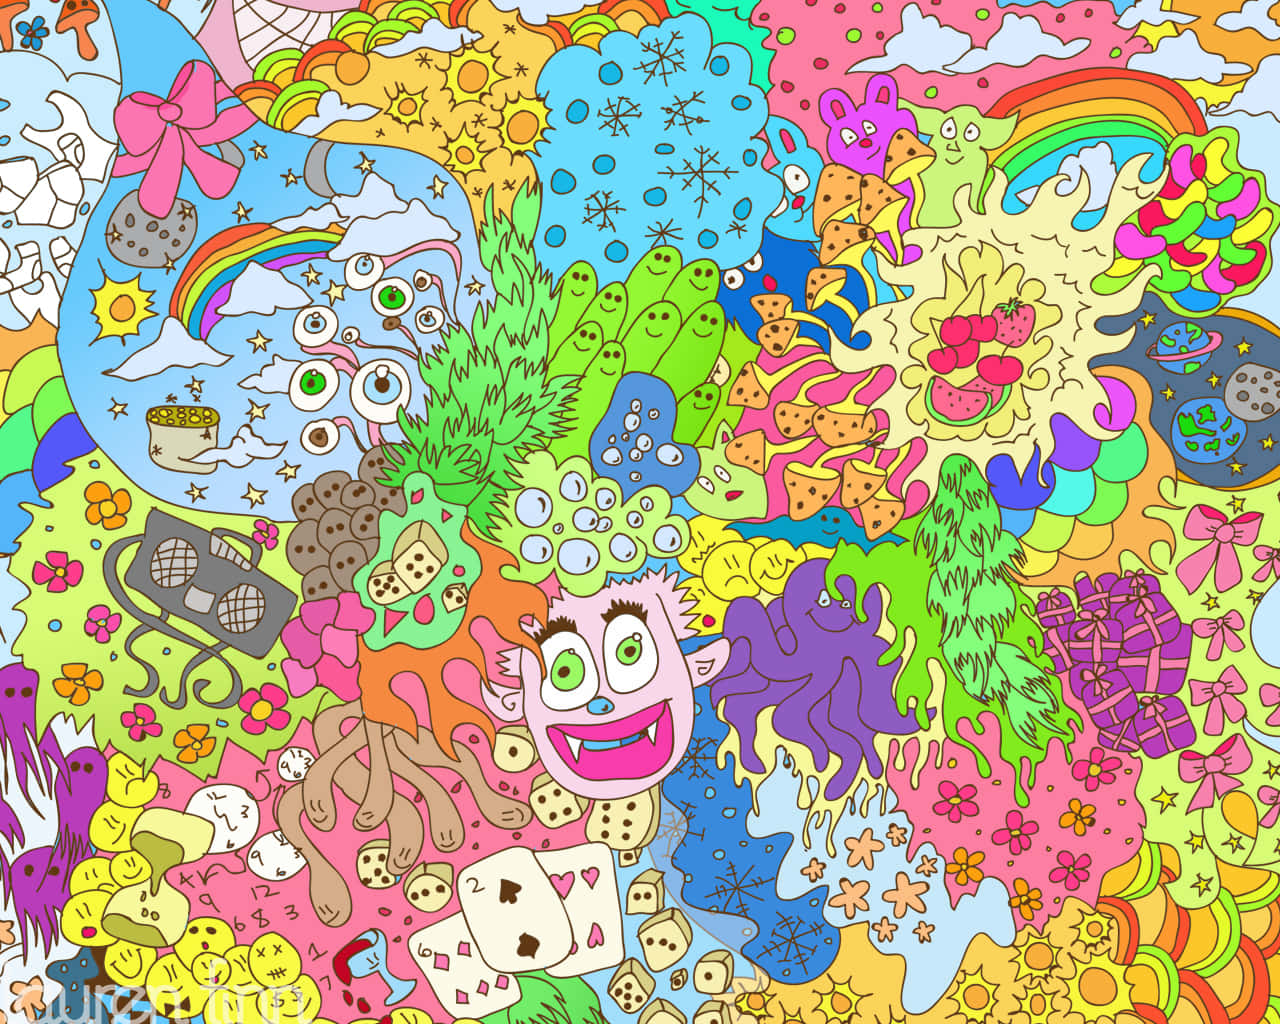 Colorful Trippy Doodle Art Picture